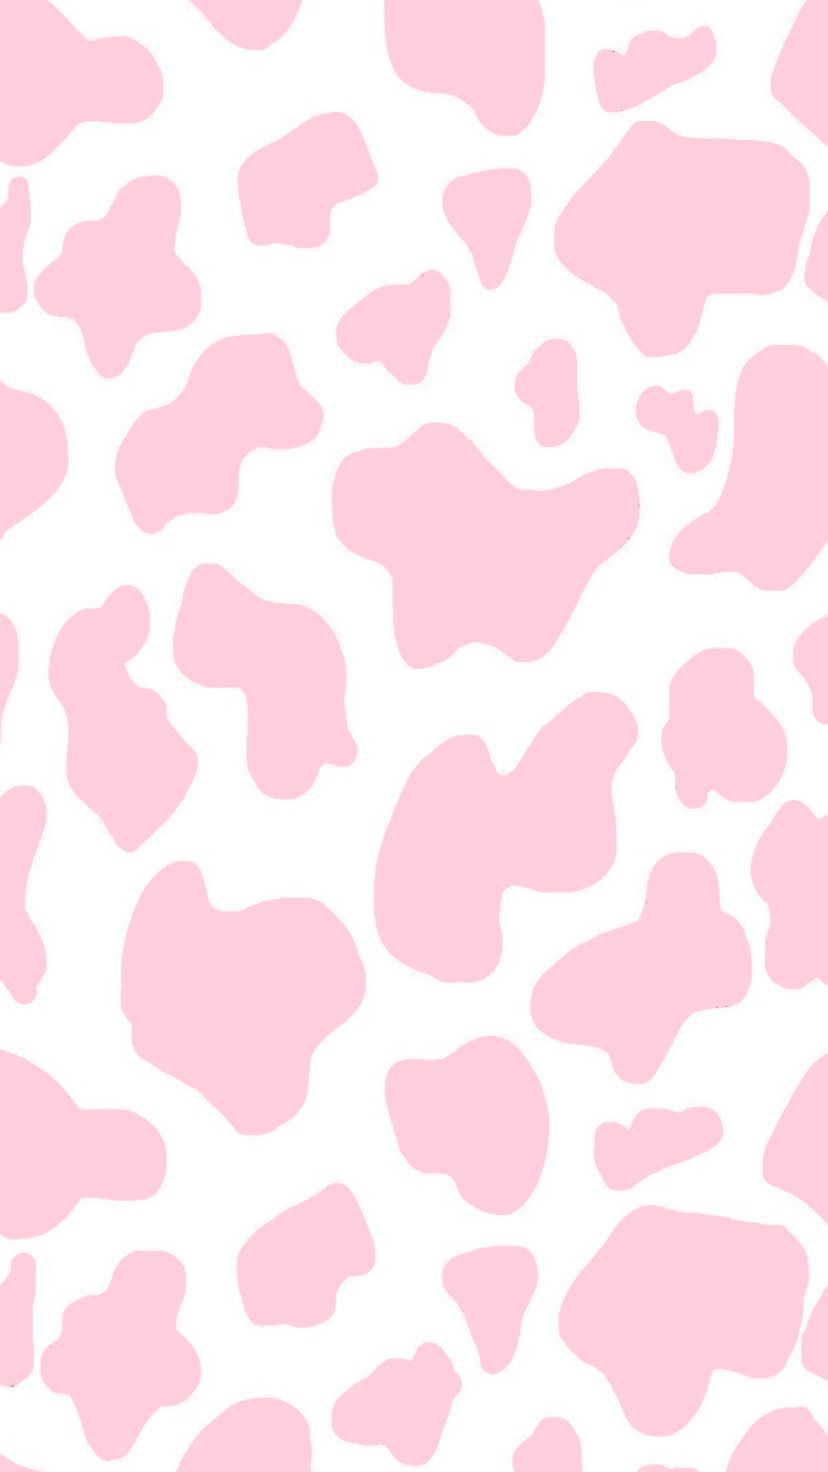 A pink cow pattern on white background - Cow